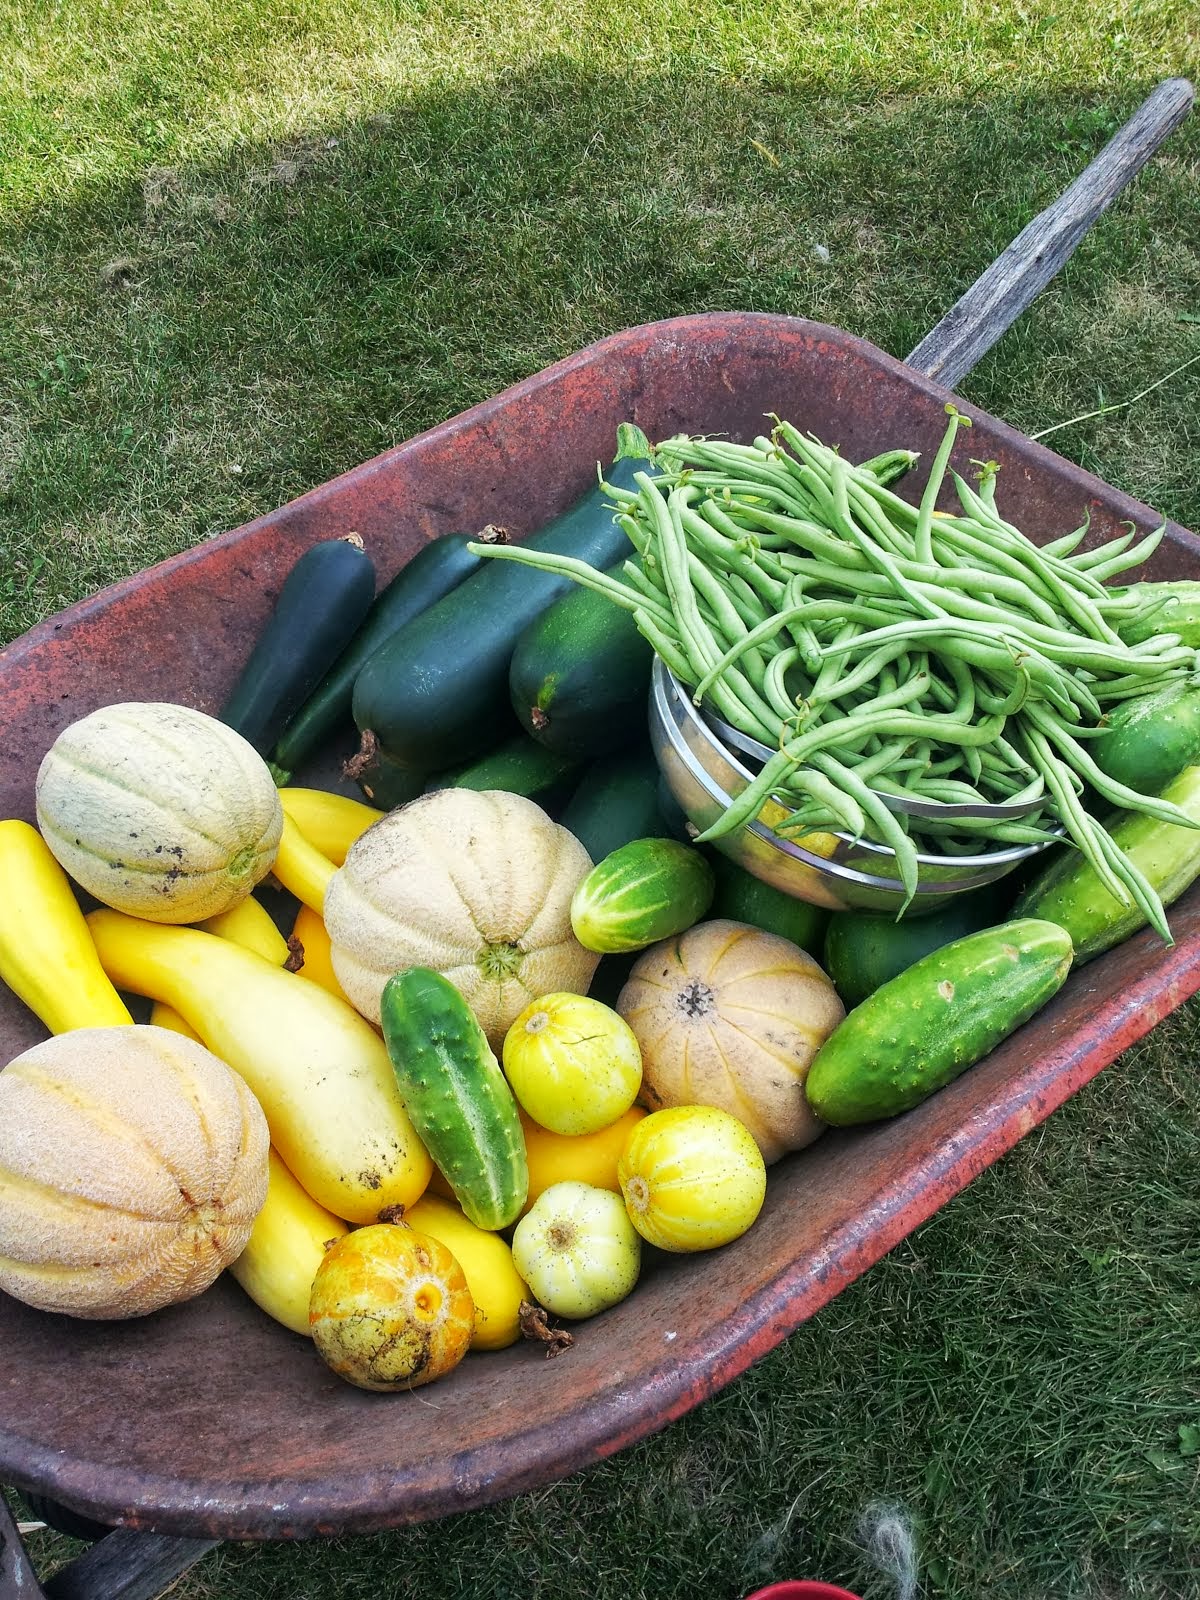 beans melons and summer squashes